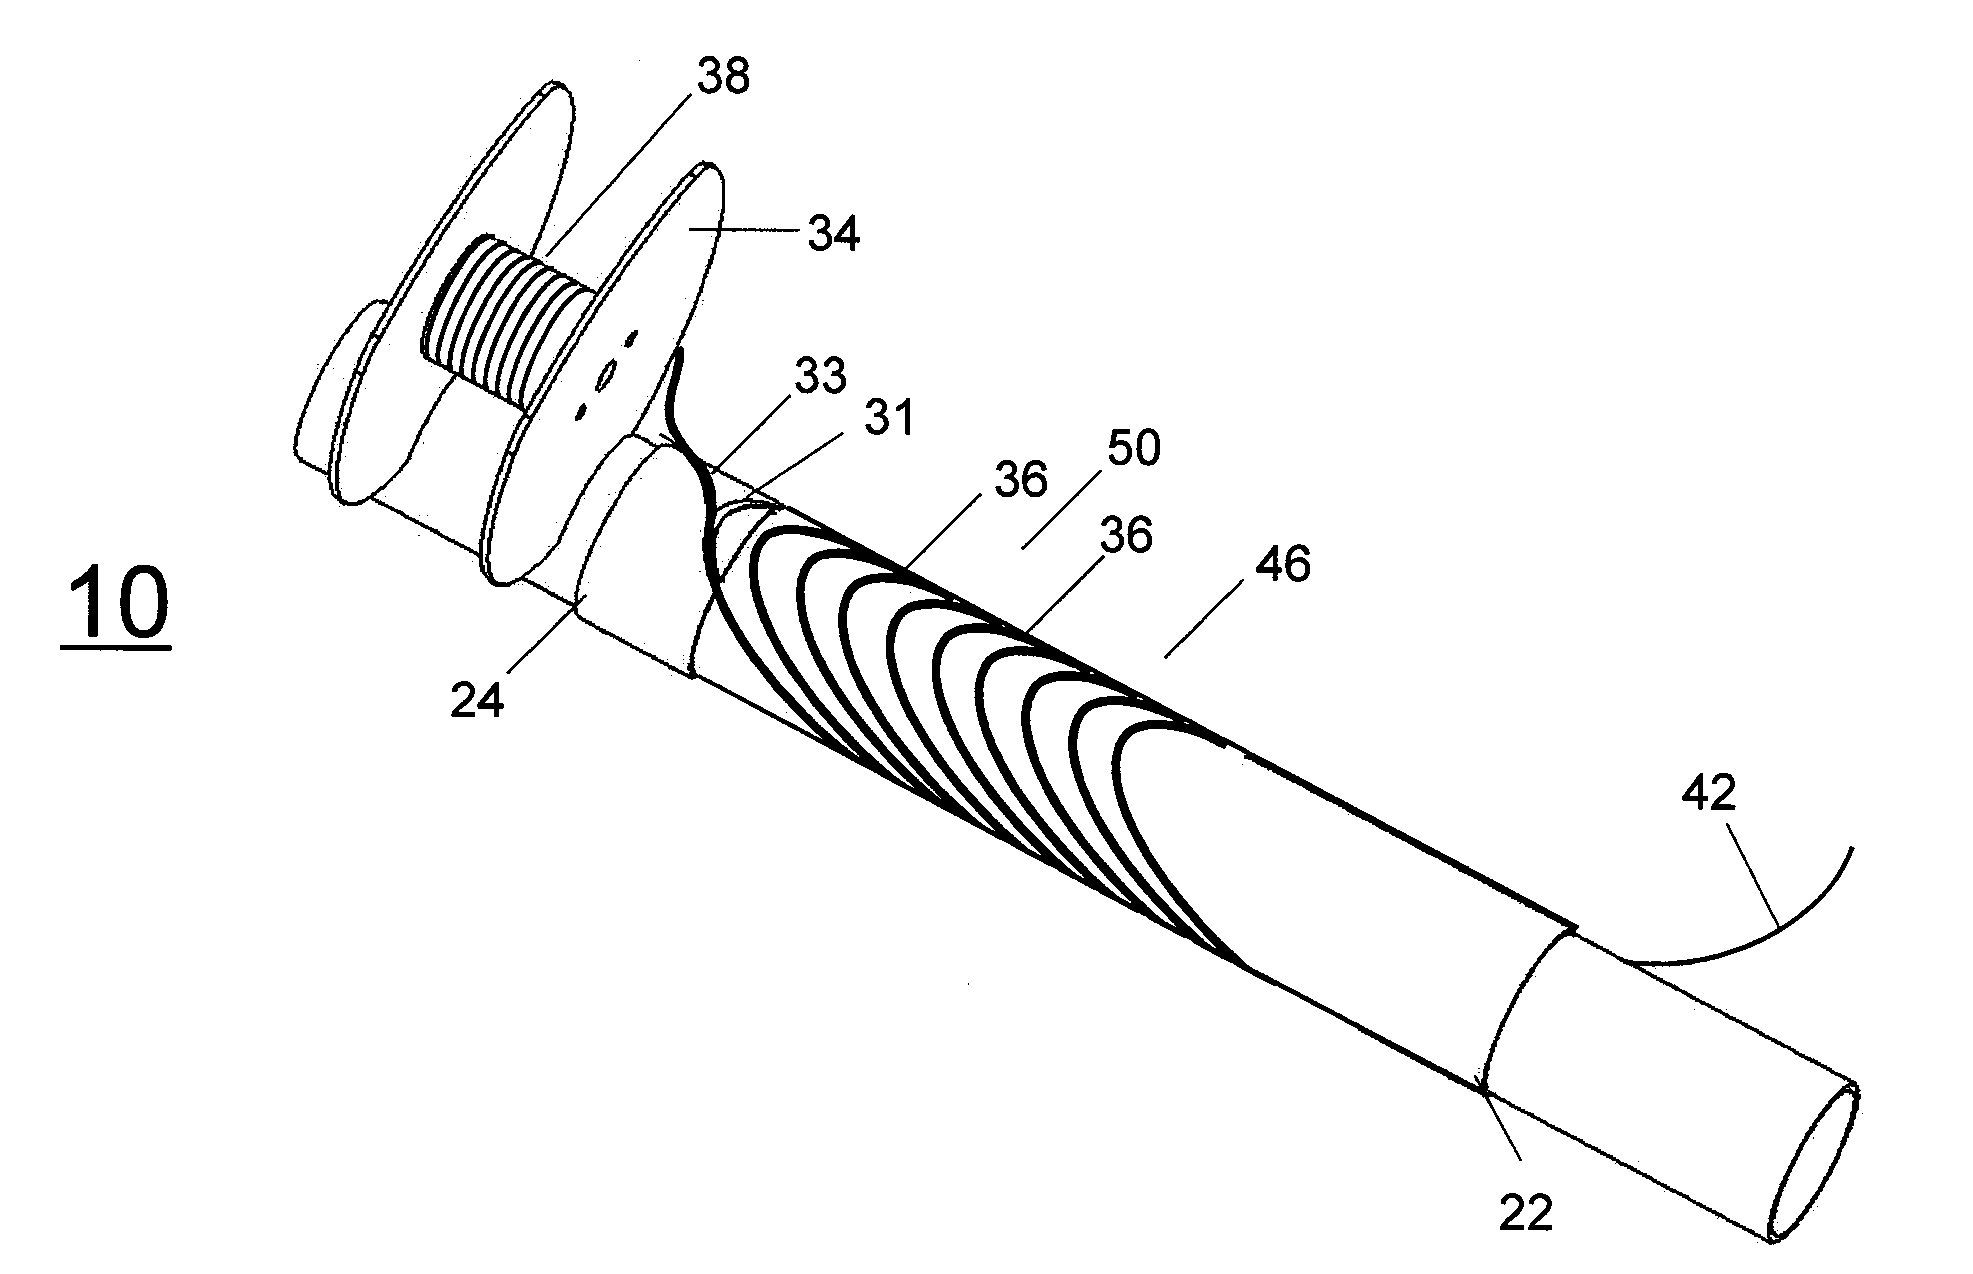 Structure For A Wiring Assembly And Method Suitable For Forming Multiple Coil Rows With Splice Free Conductor